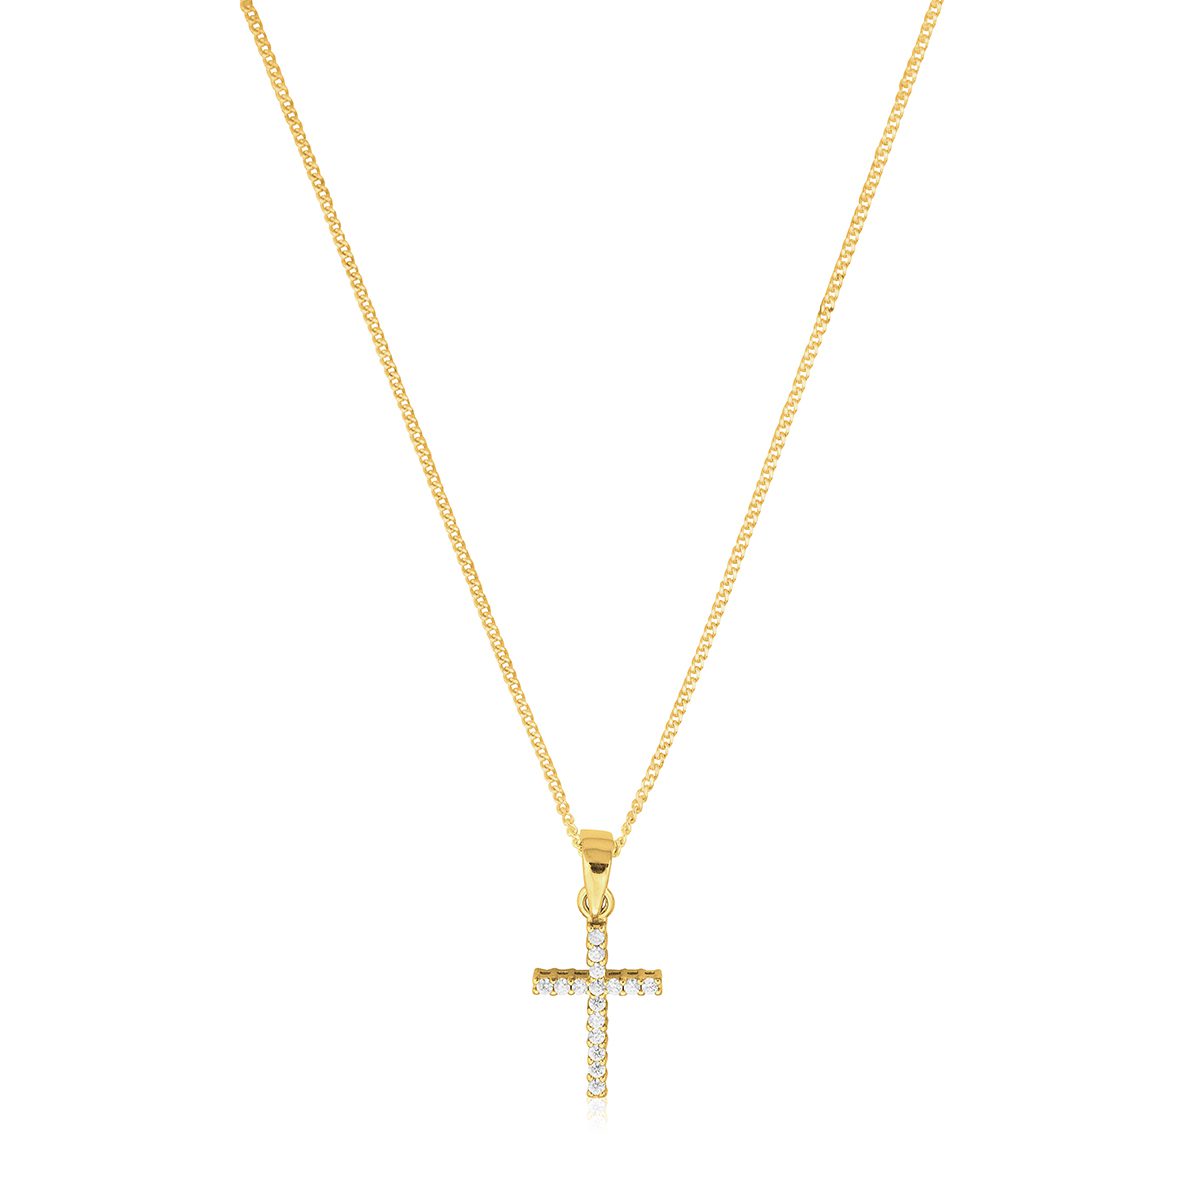 Luann necklace in gold plating – Opa Designs